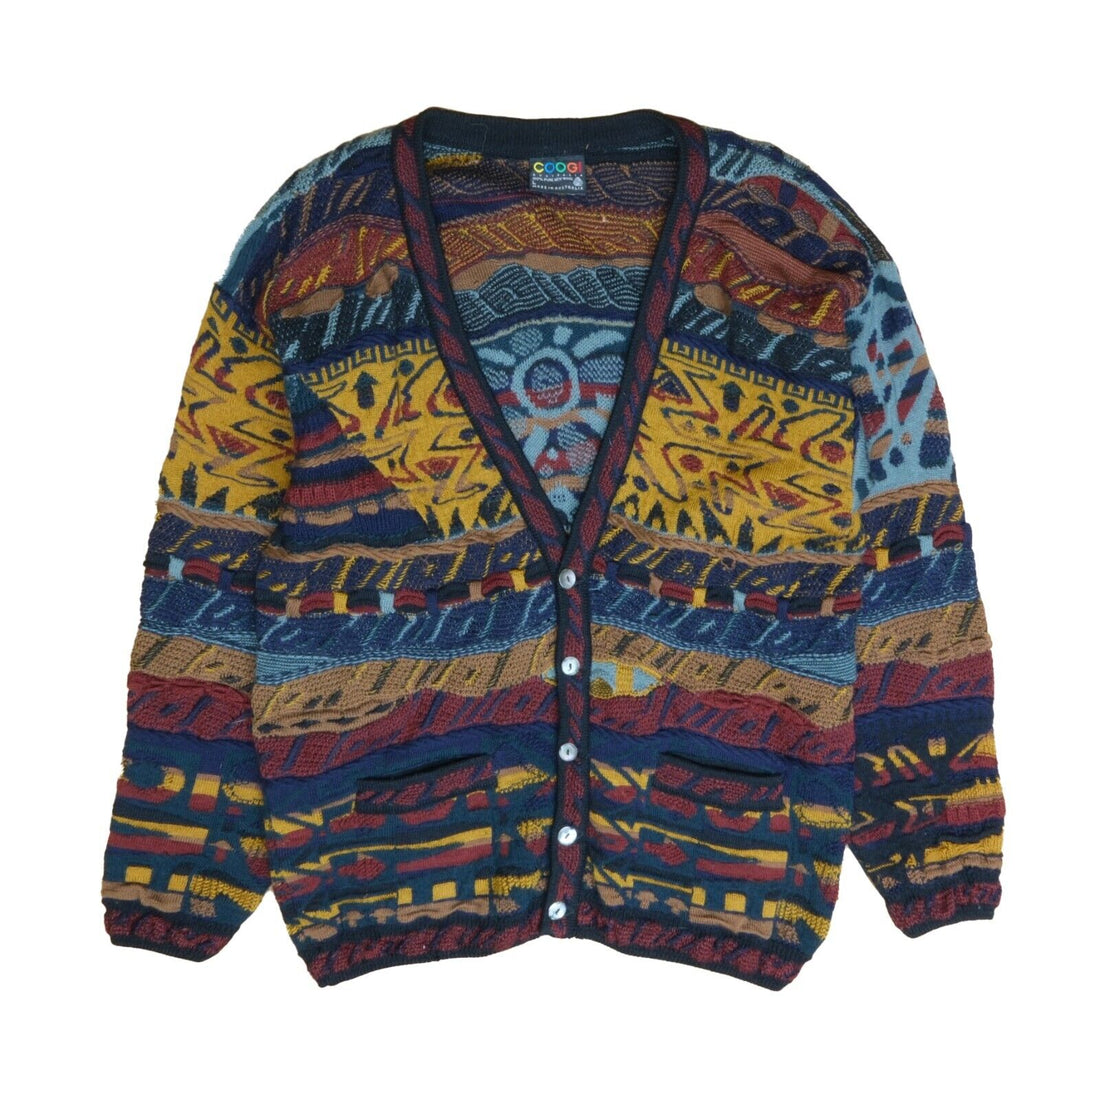 Vintage Coogi Wool 3D Knit Cardigan Sweater Size Large Multicolor 90s